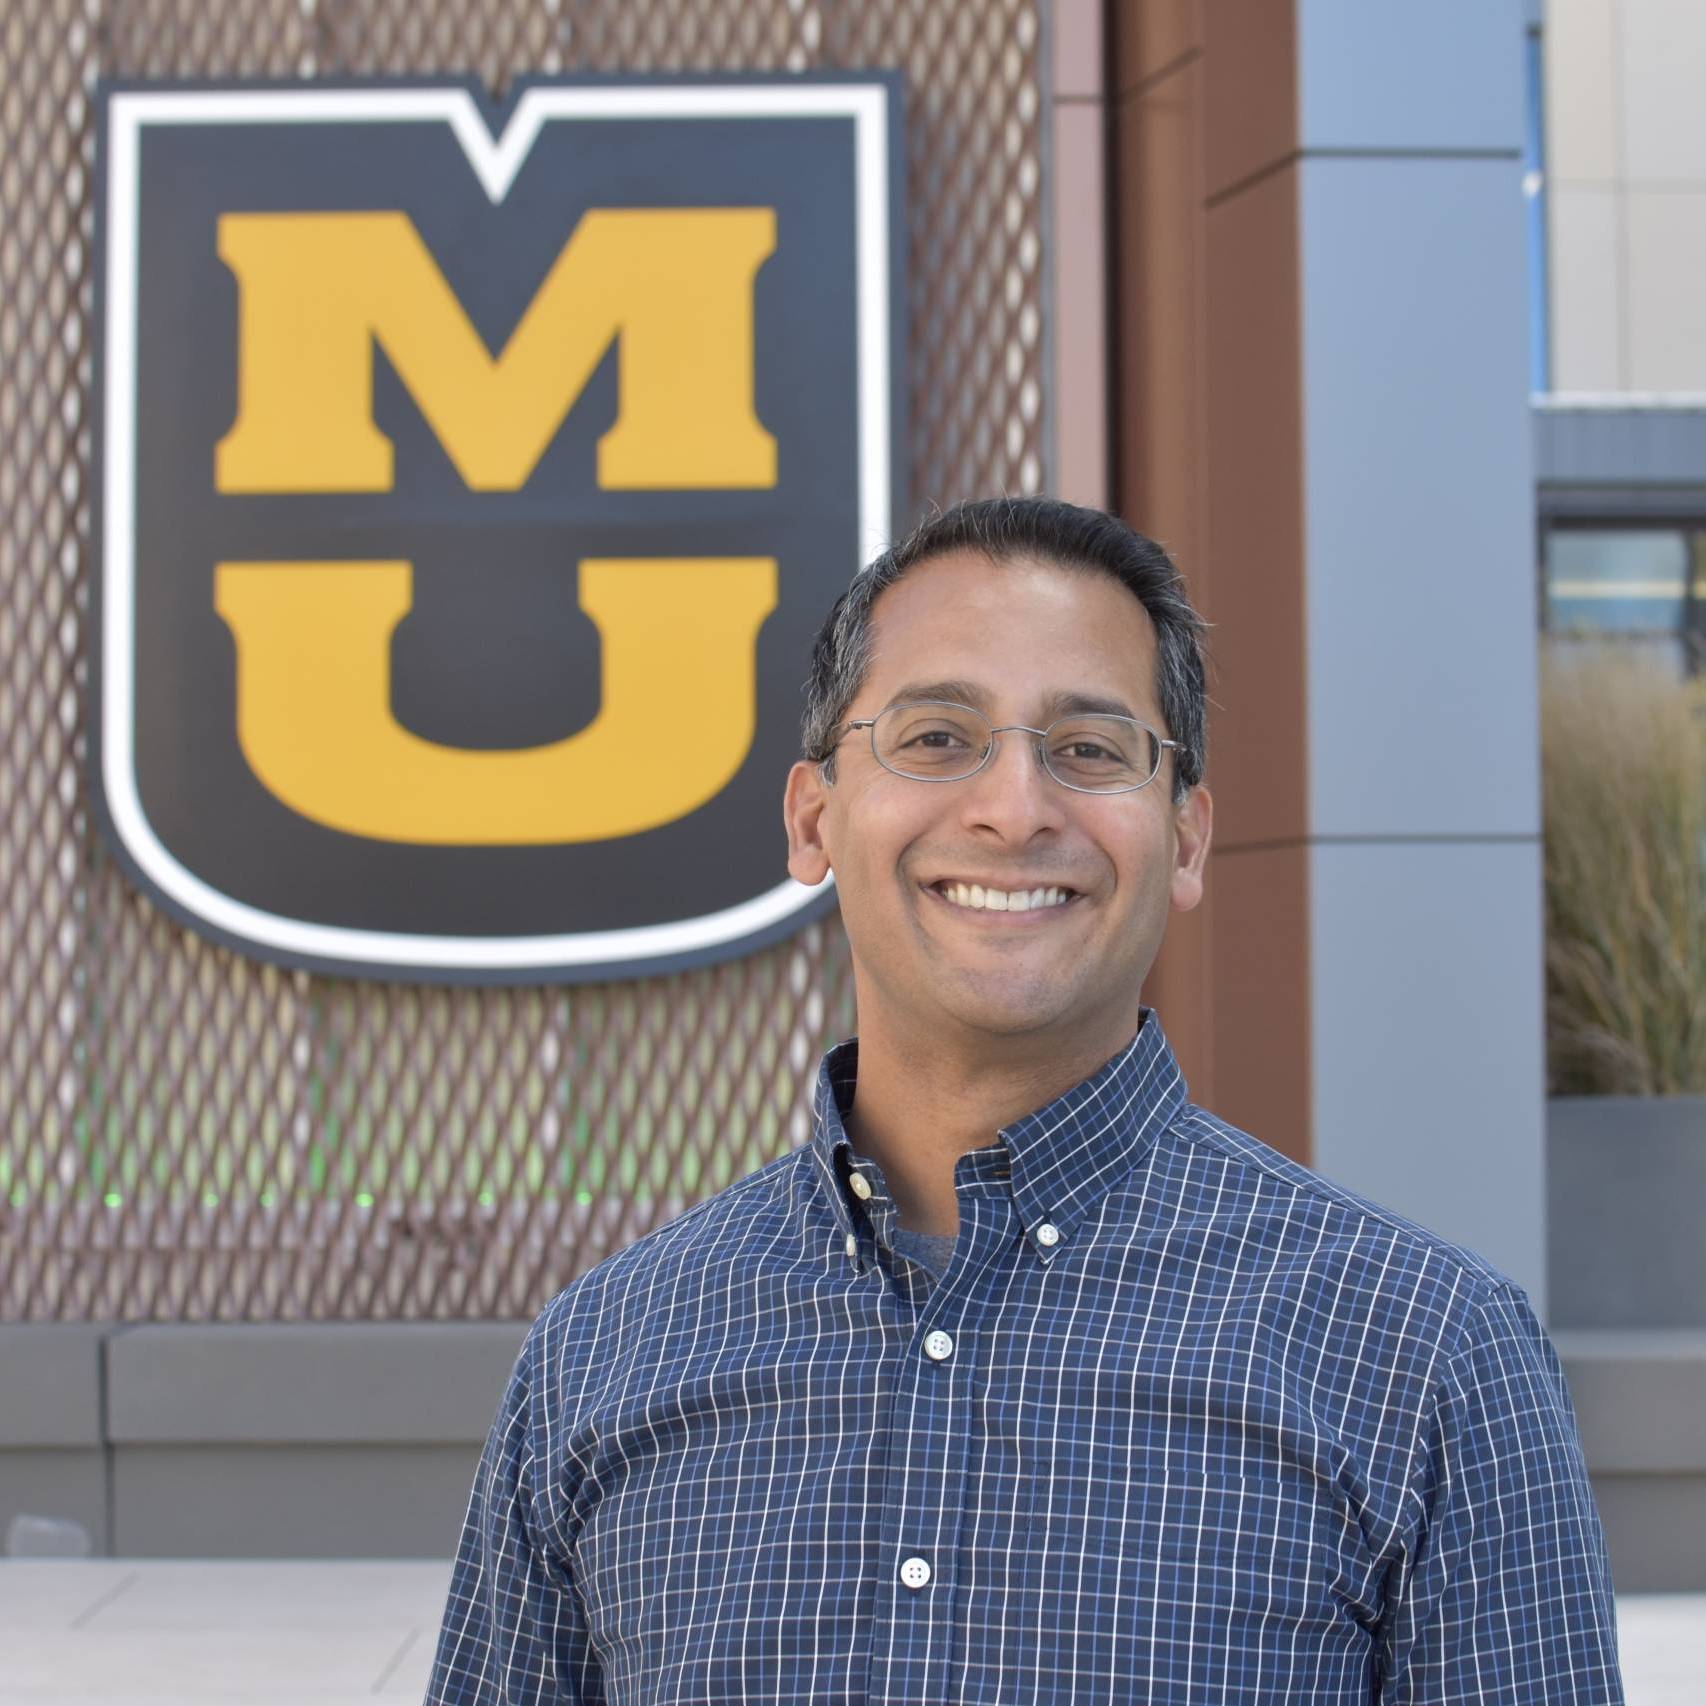 brown-skinned man with glasses, wearing a blue shirt, standing in front of a large stacked MU emblem